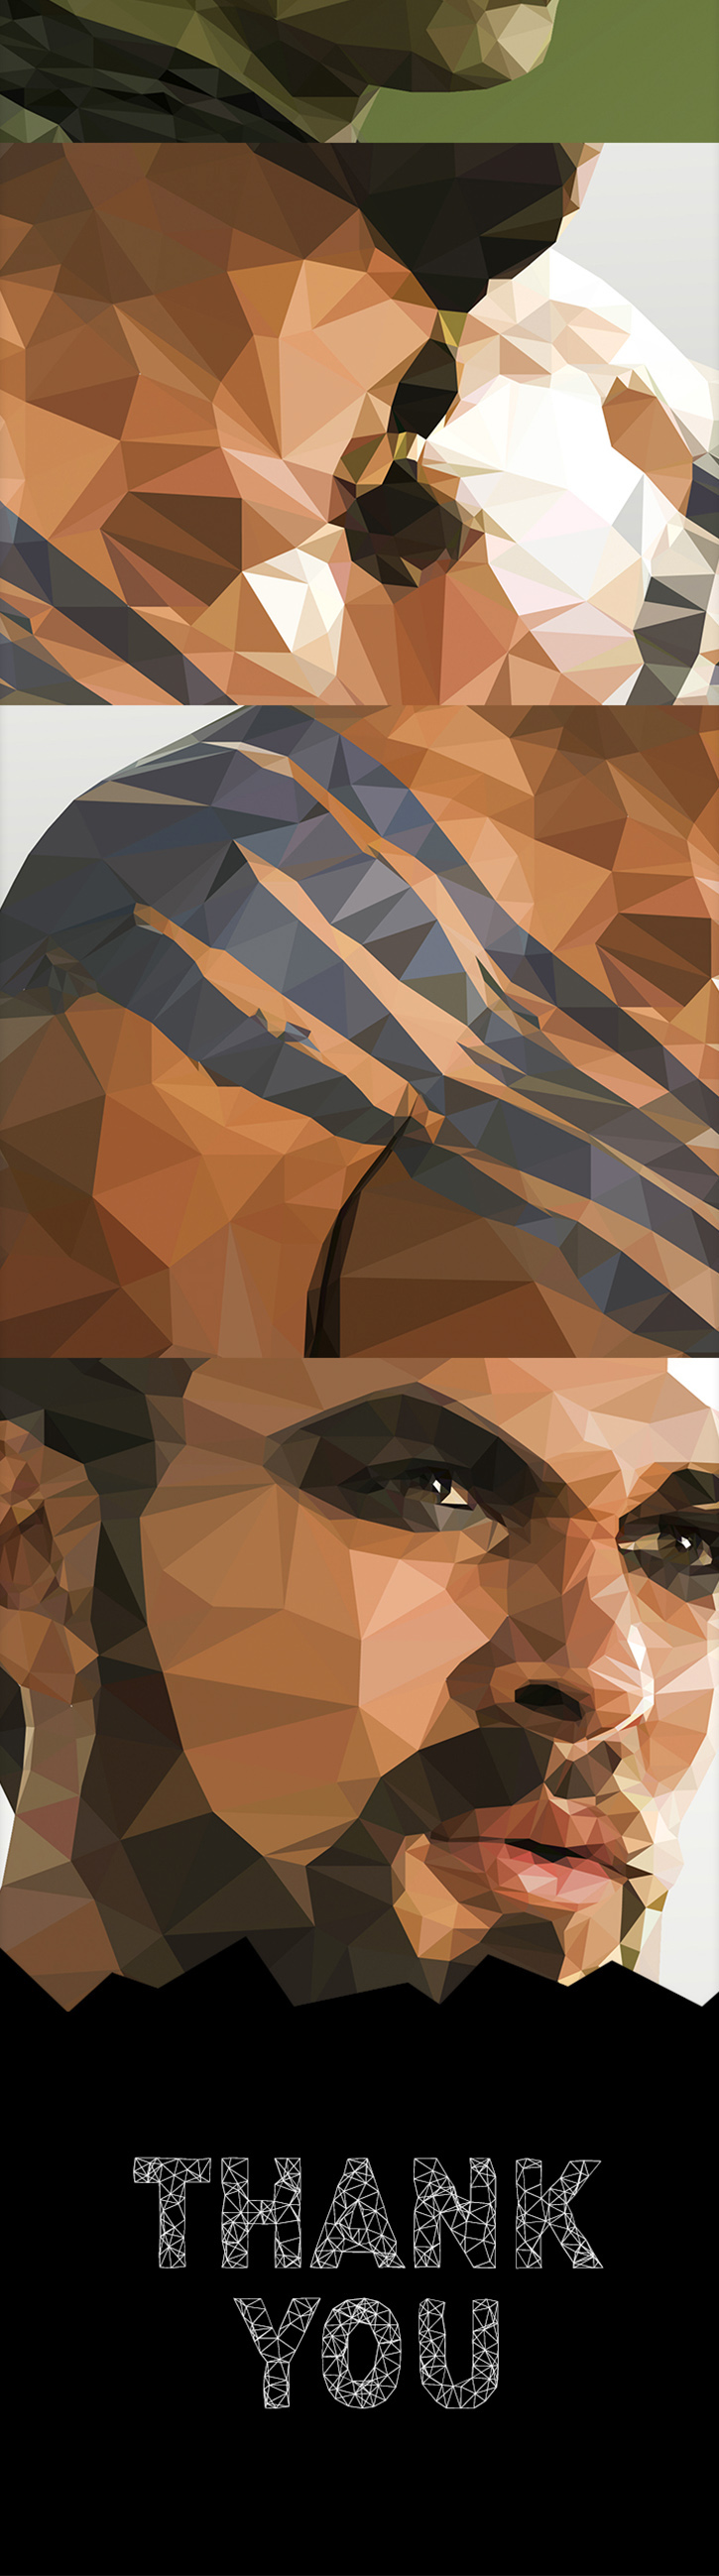 got Game of Thrones Low Poly Polygons portrait